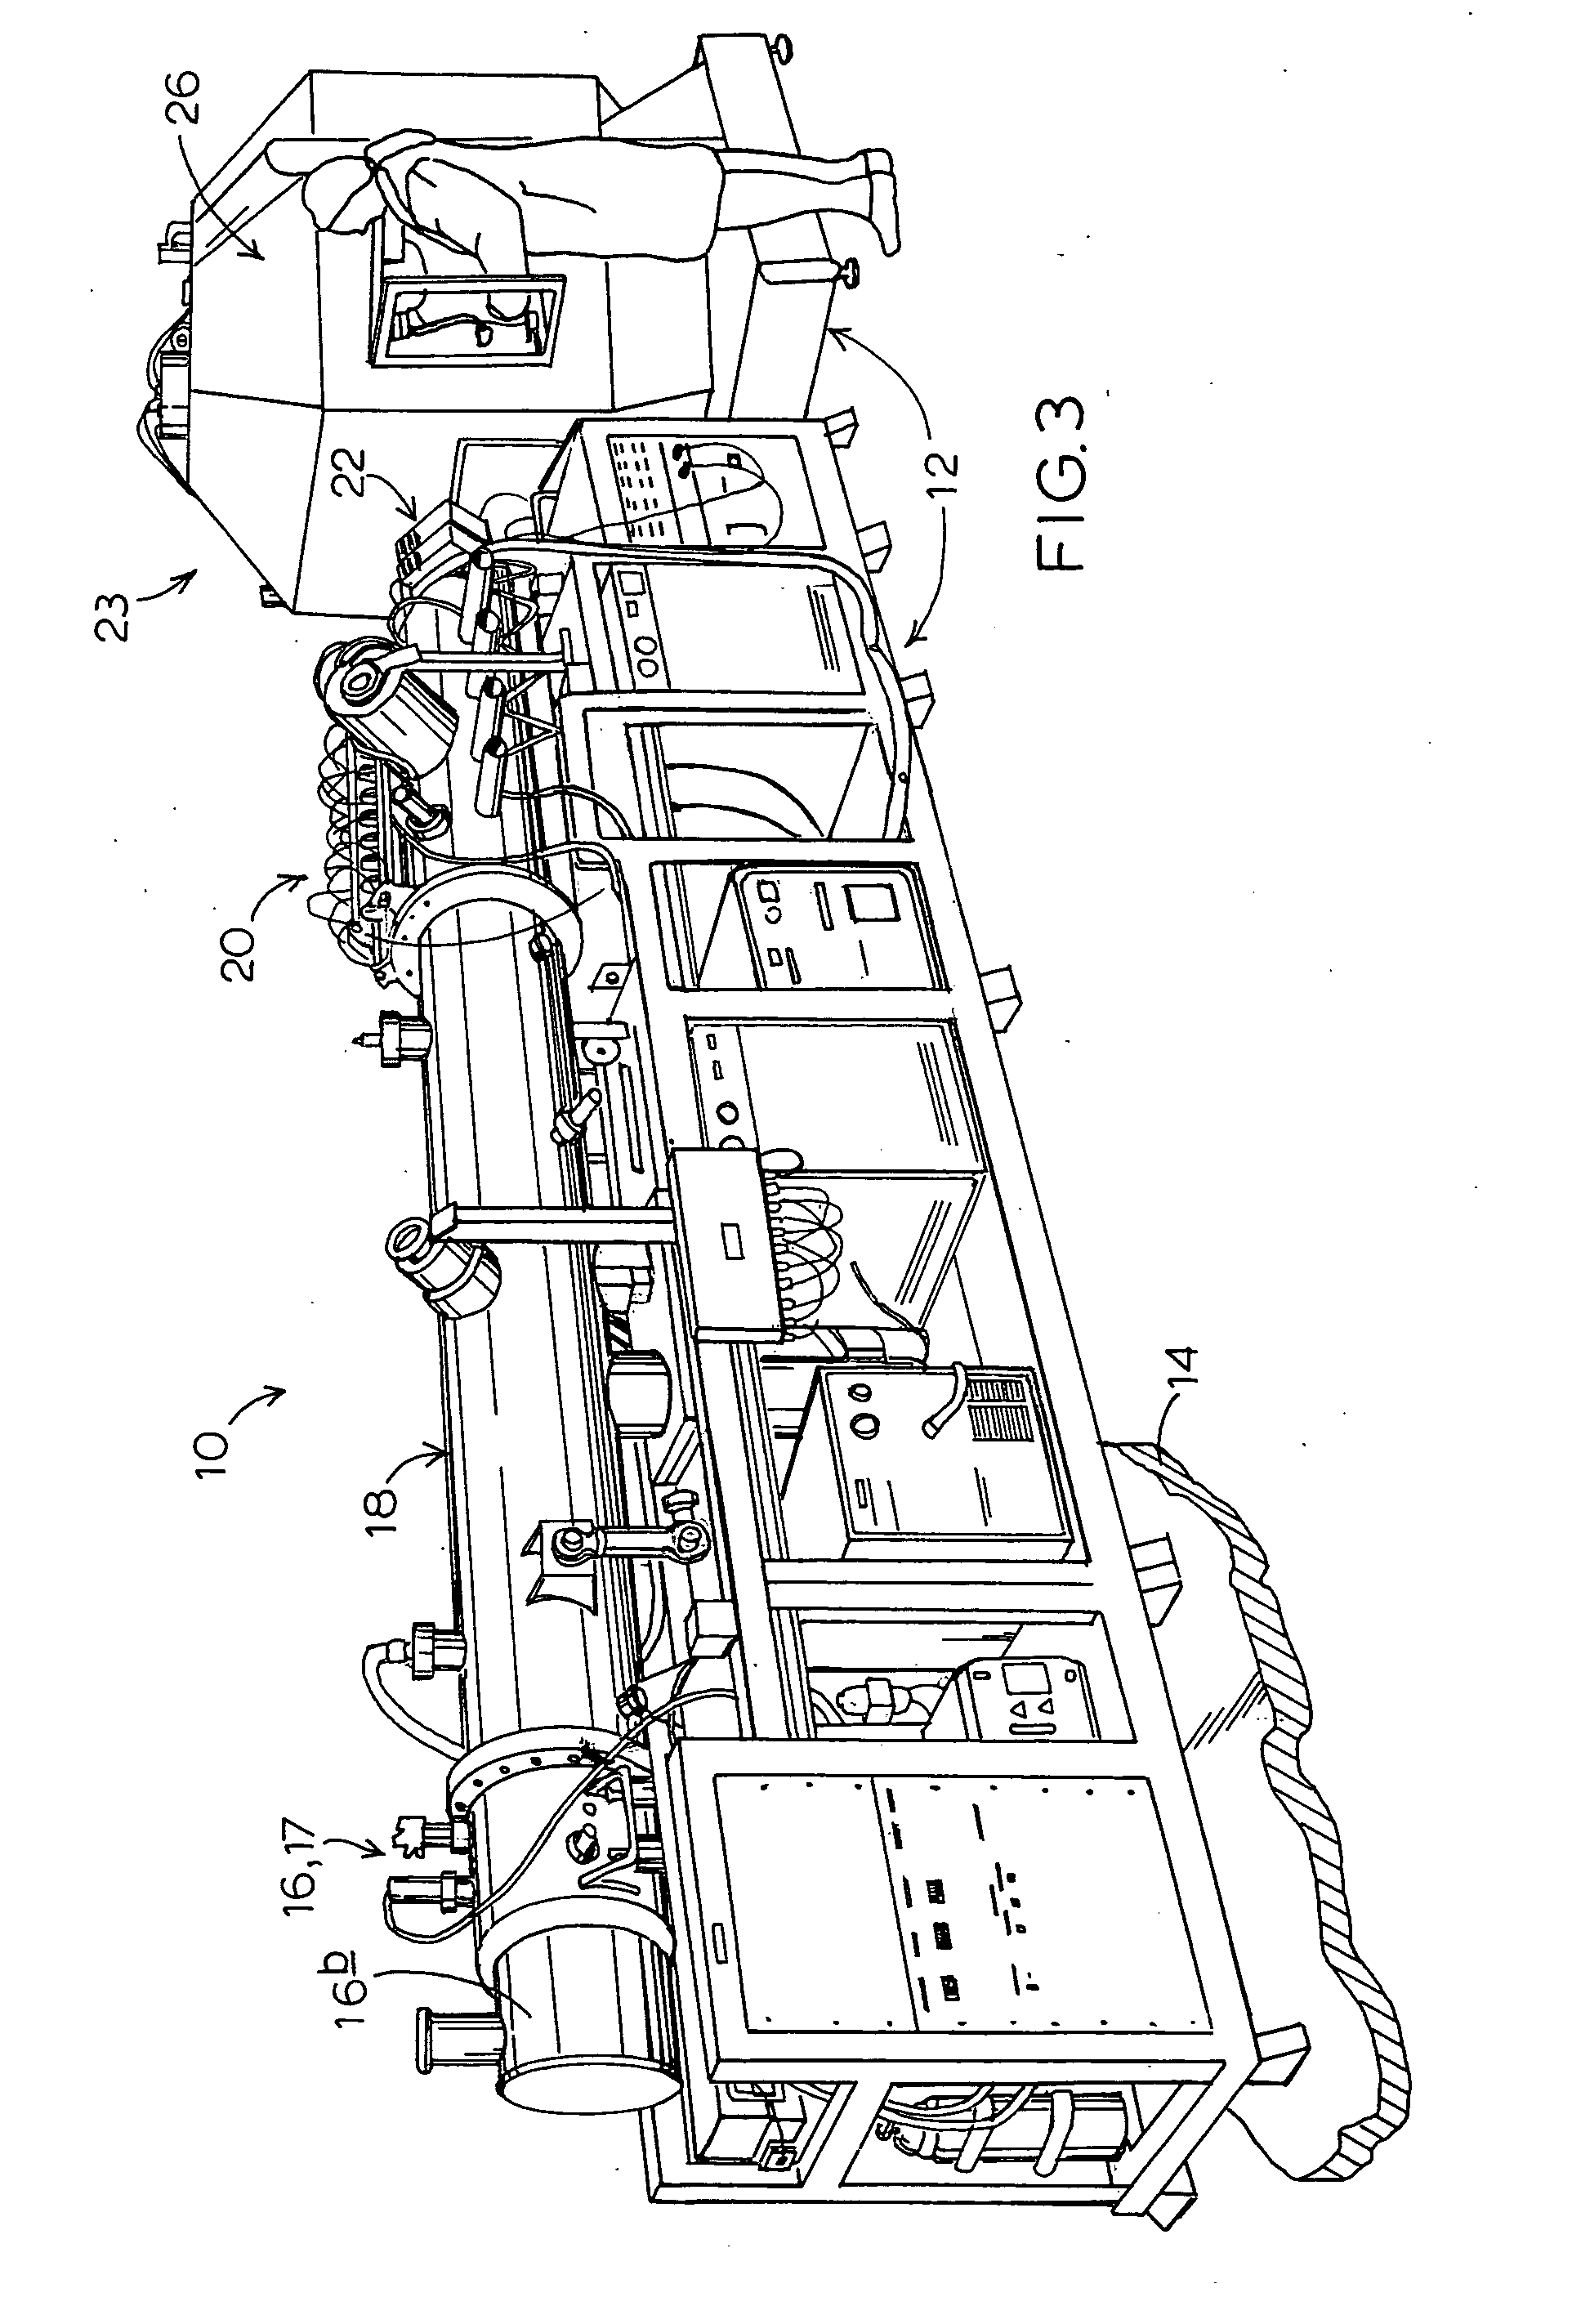 Mobile/transportable PET radioisotope system with omnidirectional self-shielding